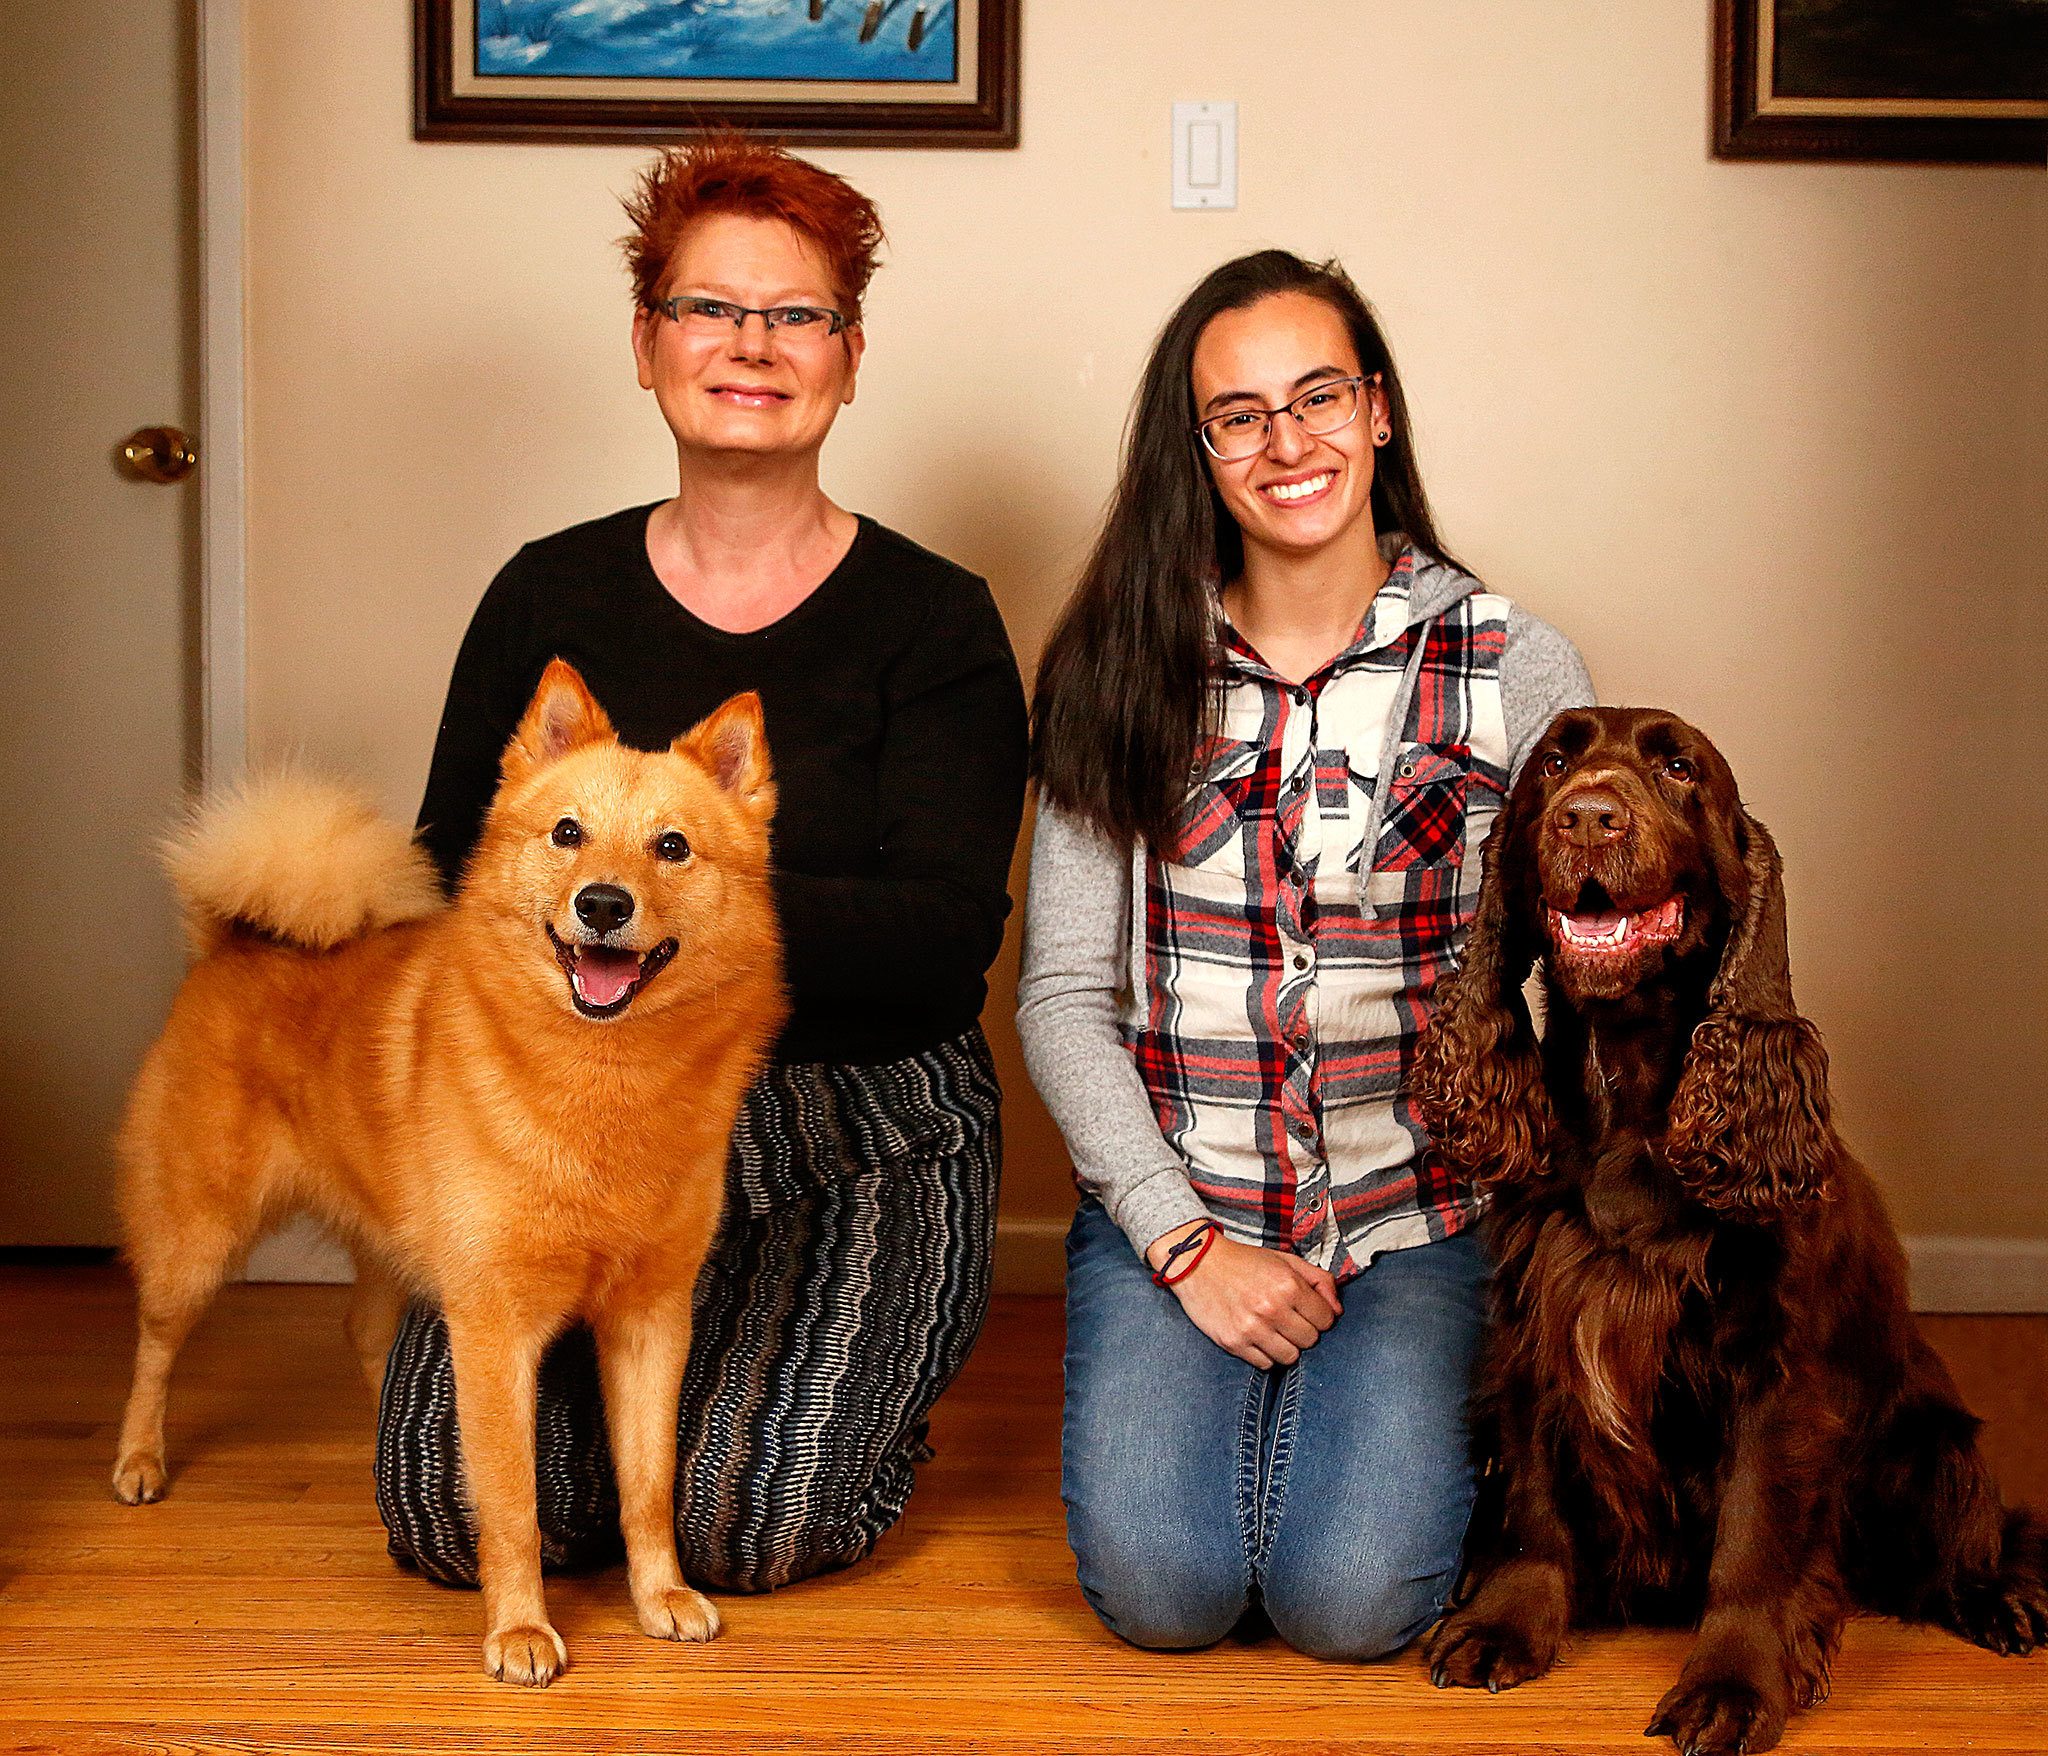 Everett’s Wendy Whiteley (left) with Zoom, her Finnish Spitz, gets together at her Lowell neighborhood home with Shahntae Martinez and her Field Spaniel, Hudson. Martinez, a 17-year-old Sequoia High School student, and Whiteley will compete with their dogs next week at the Westminster Kennel Club Dog Show in New York City. (Dan Bates / The Herald)